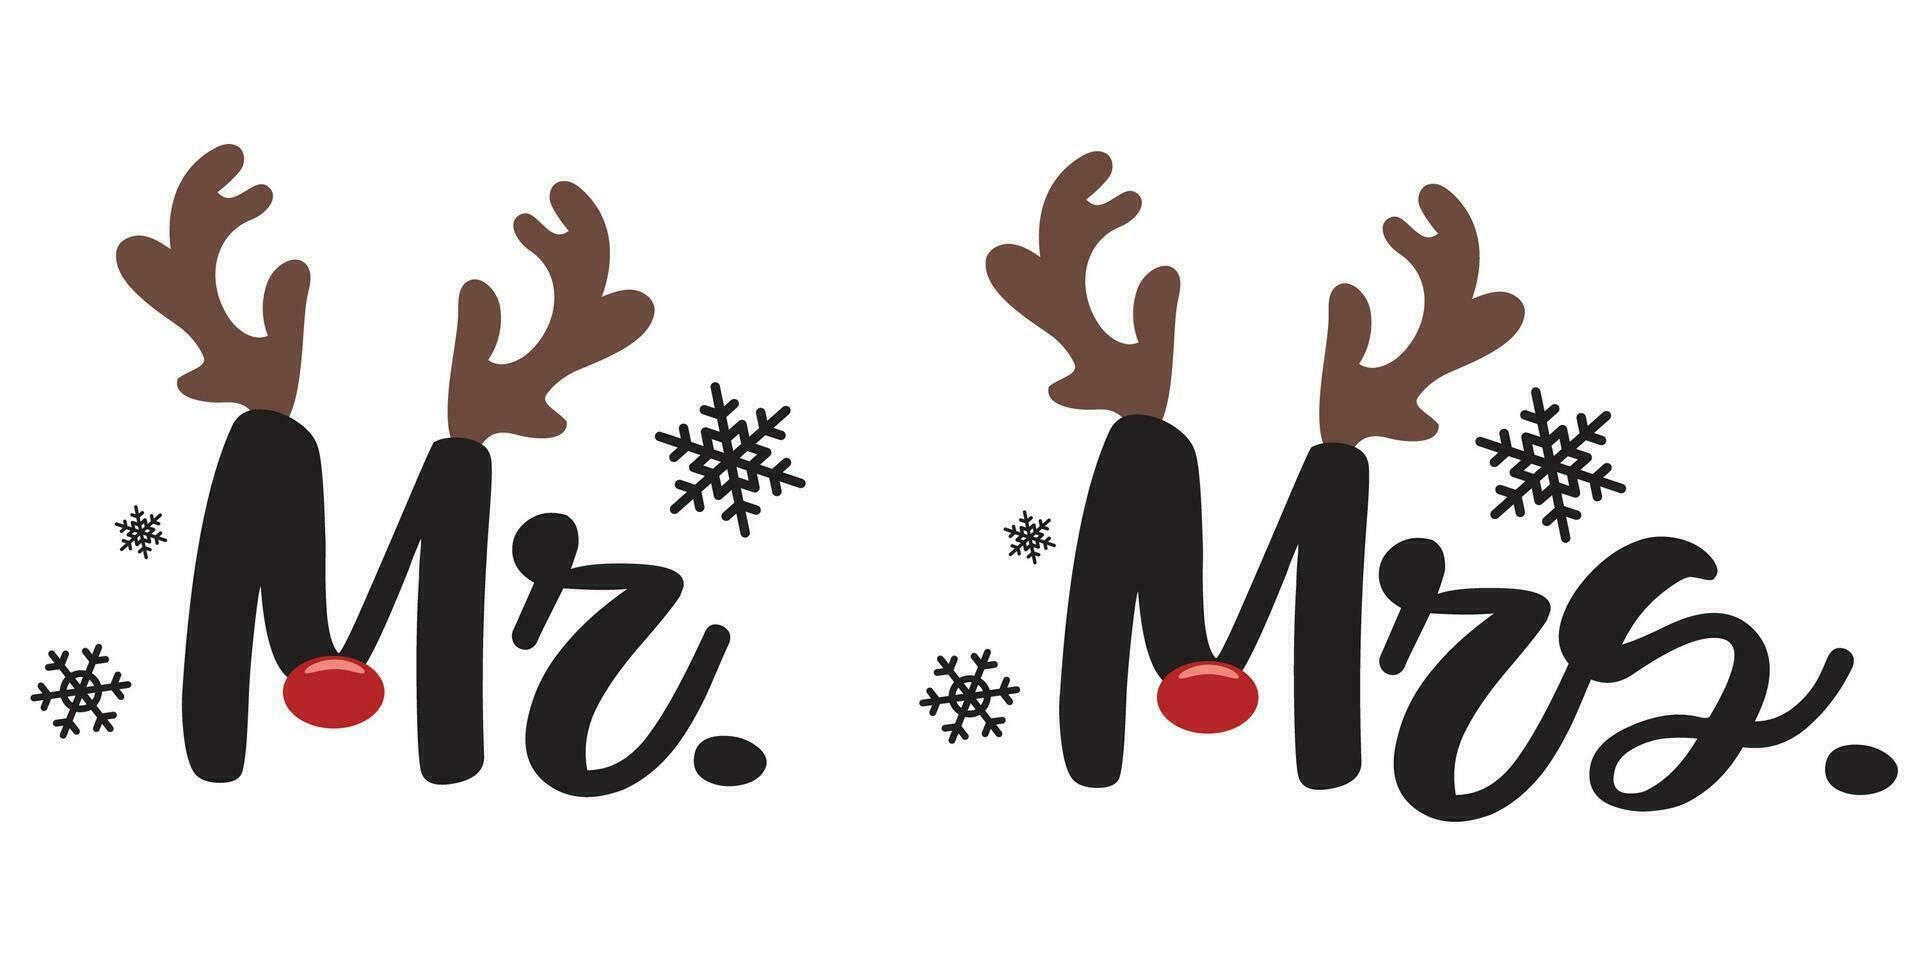 Christmas Mr. and Mrs. wedding vector illustration with cute reindeer horns. Merry Christmas design isolated good for Xmas greetings cards, poster, print, sticker, invitations, baby t-shirt, mug